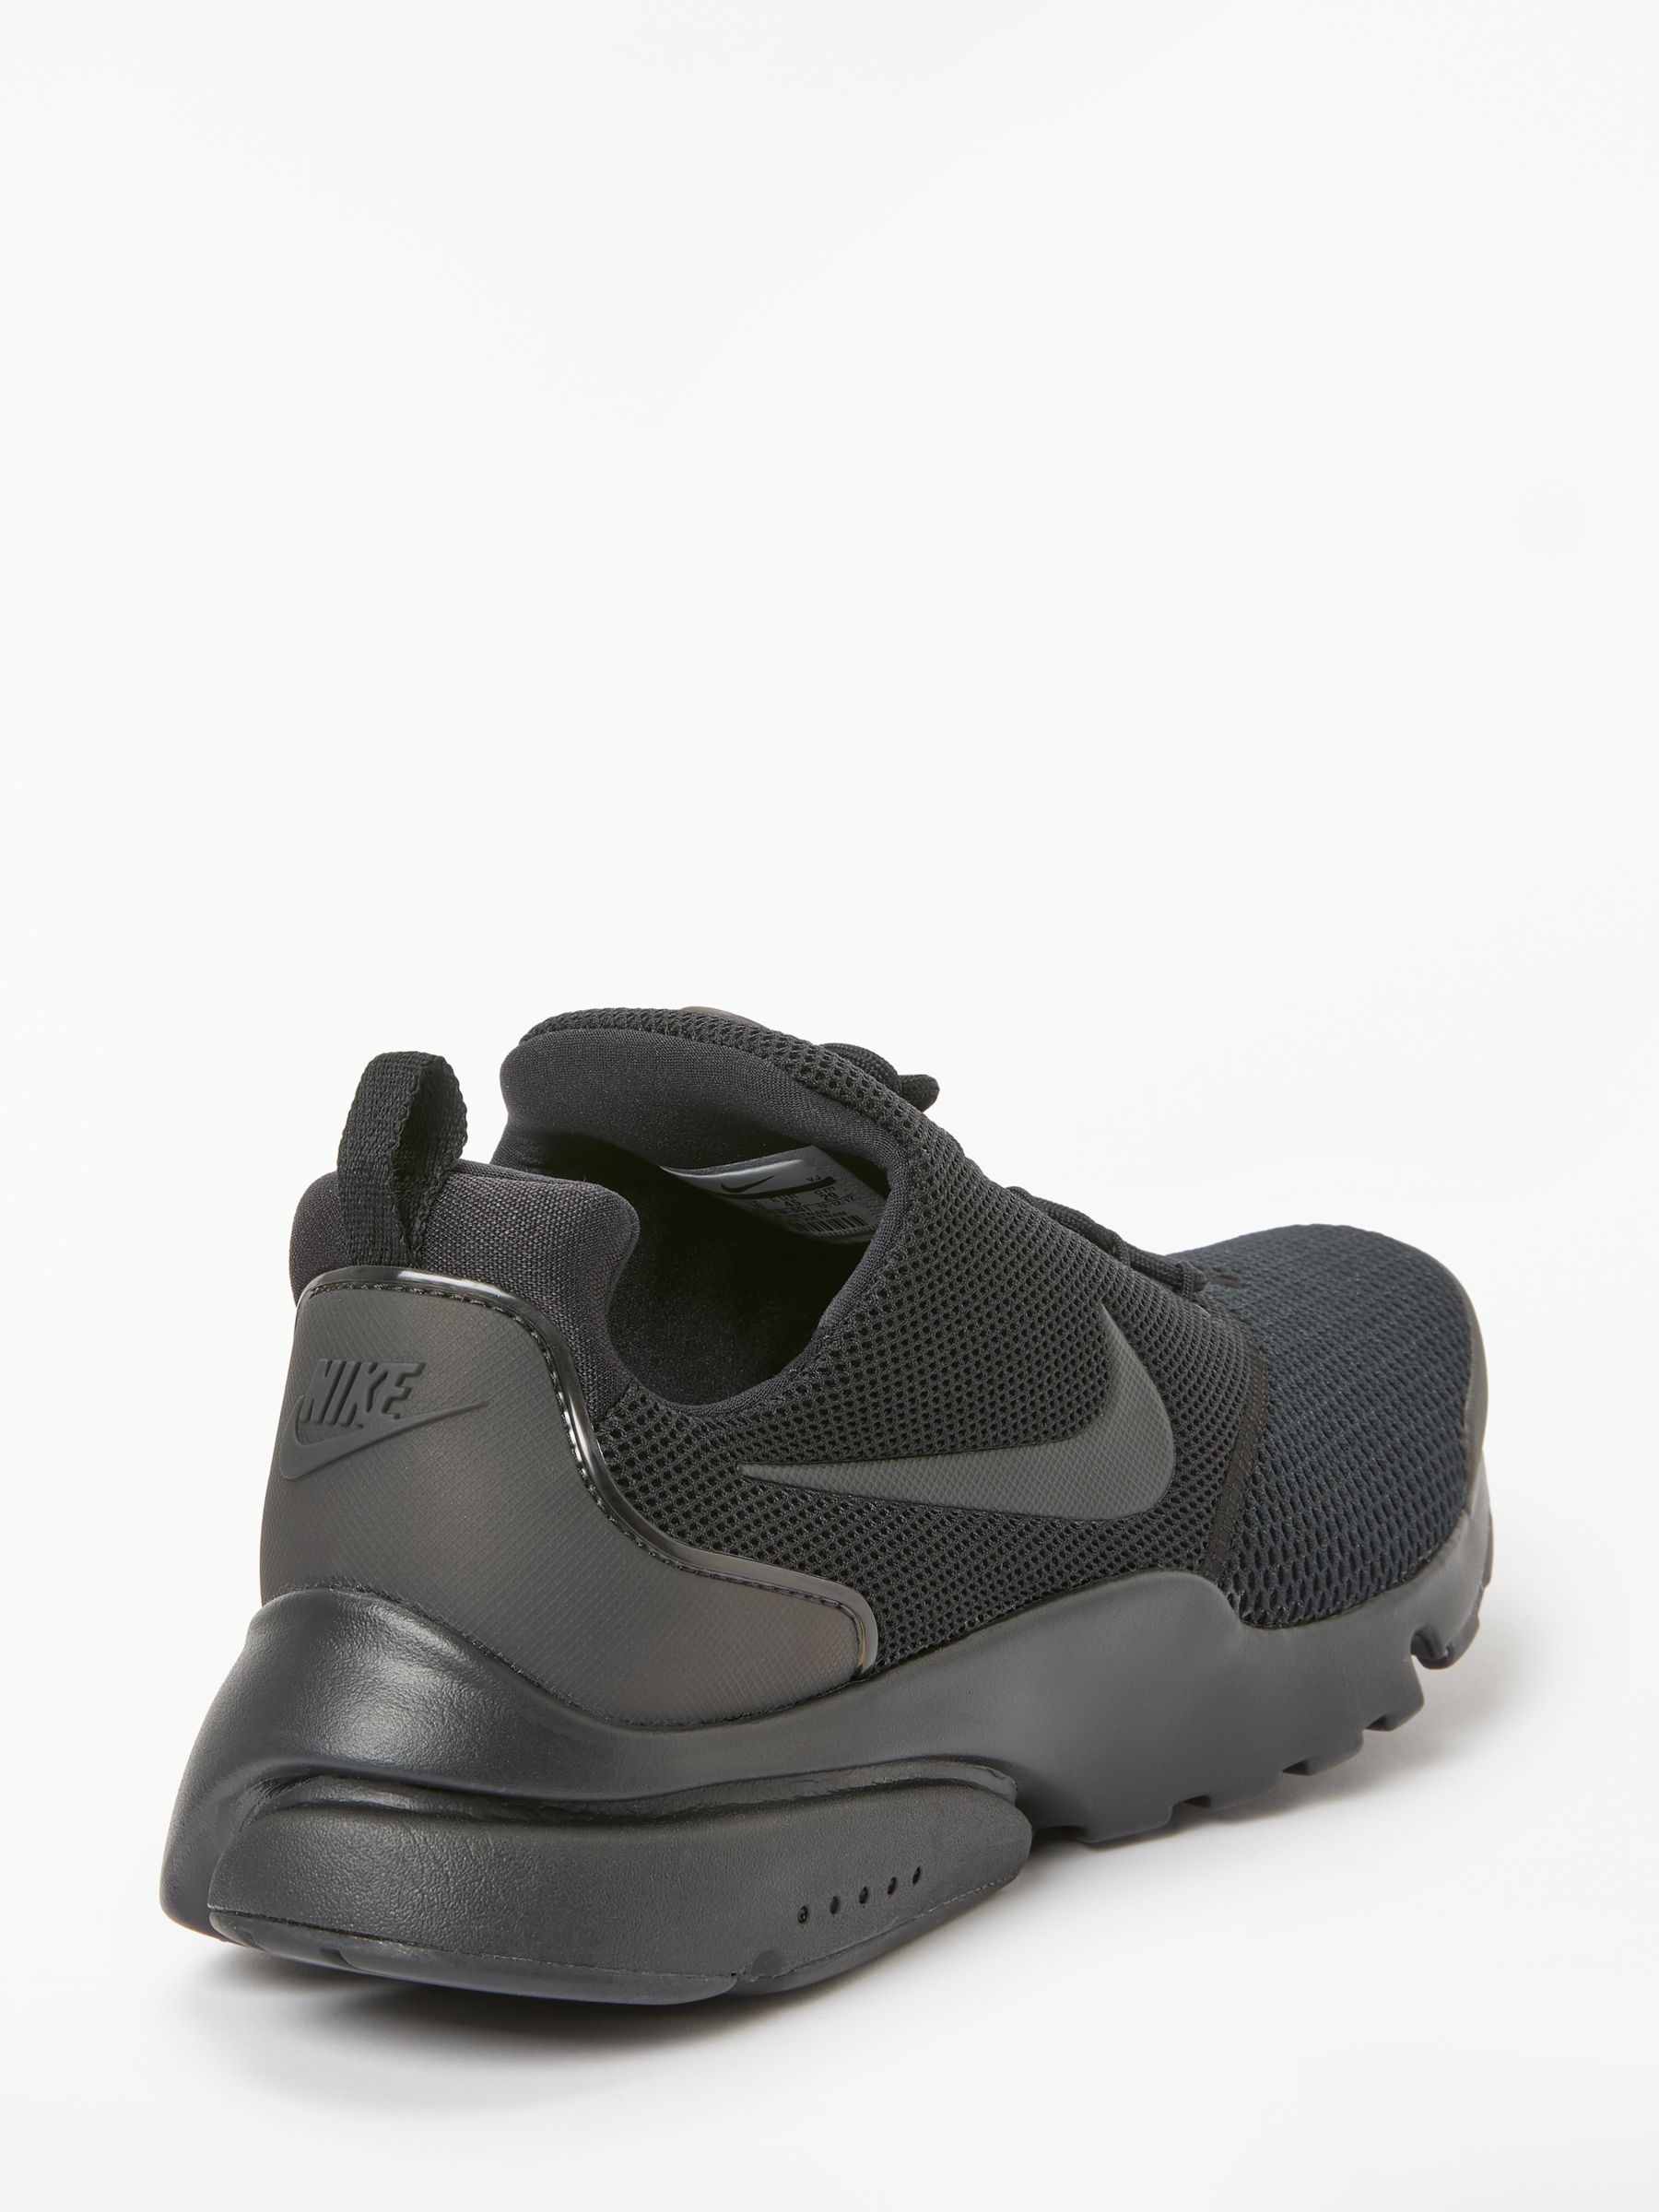 mens nike presto fly trainers